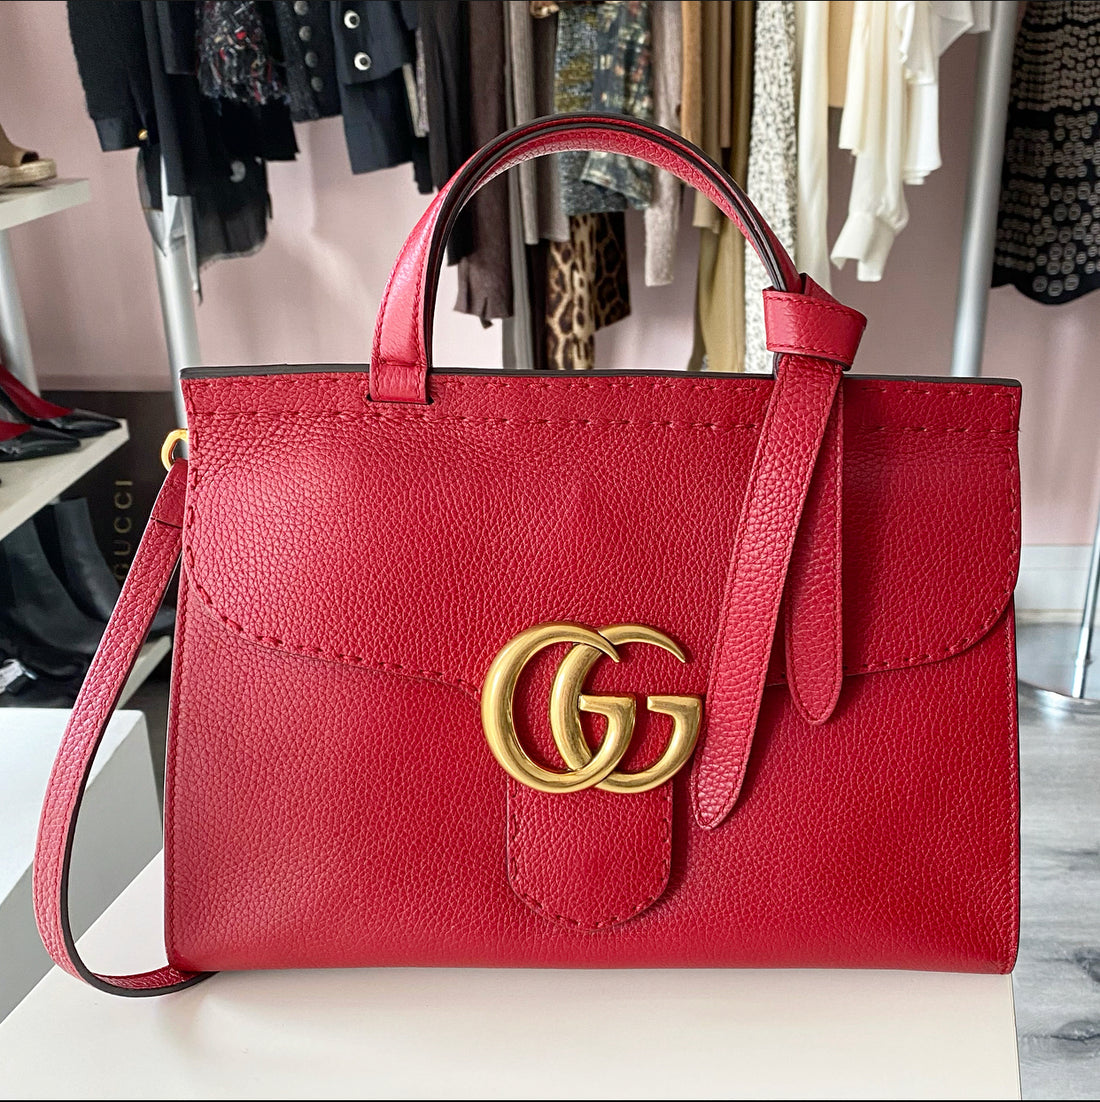 Gucci Red Leather Marmont Top Handle Two-Way Bag